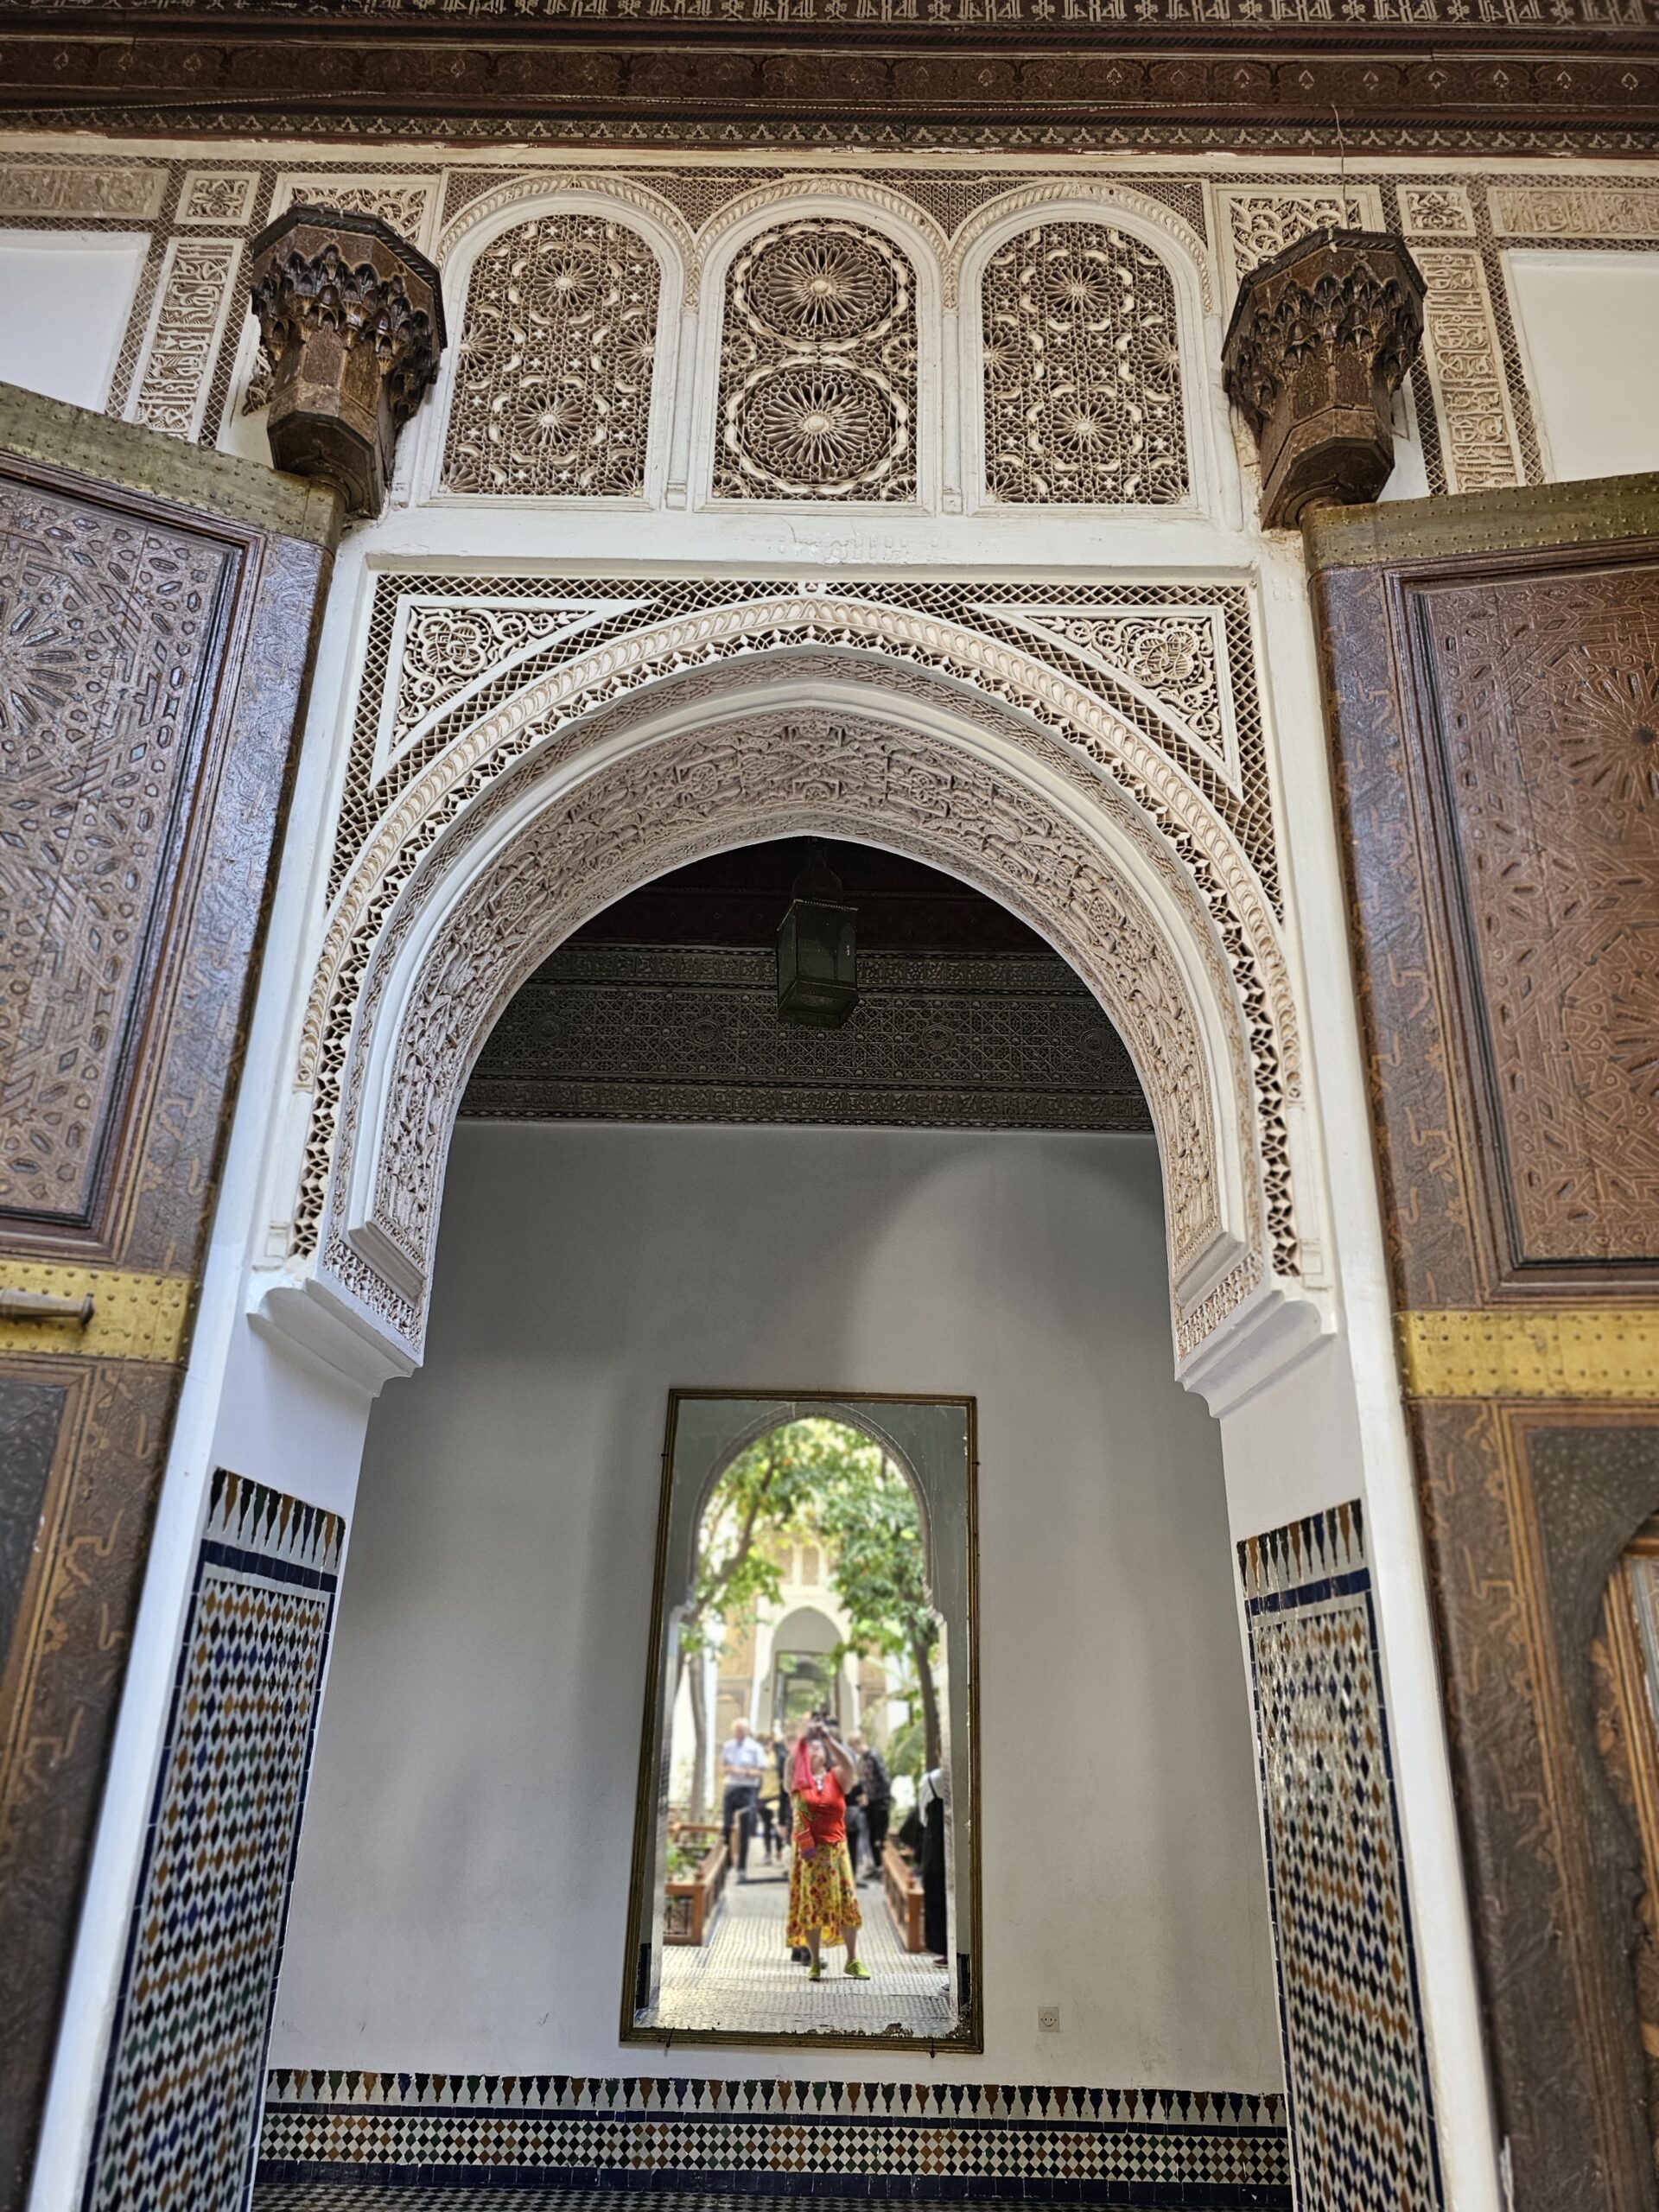 Giant wooden carved doors at Bahia Palace, Marrakesh. Image by 360onhistory.